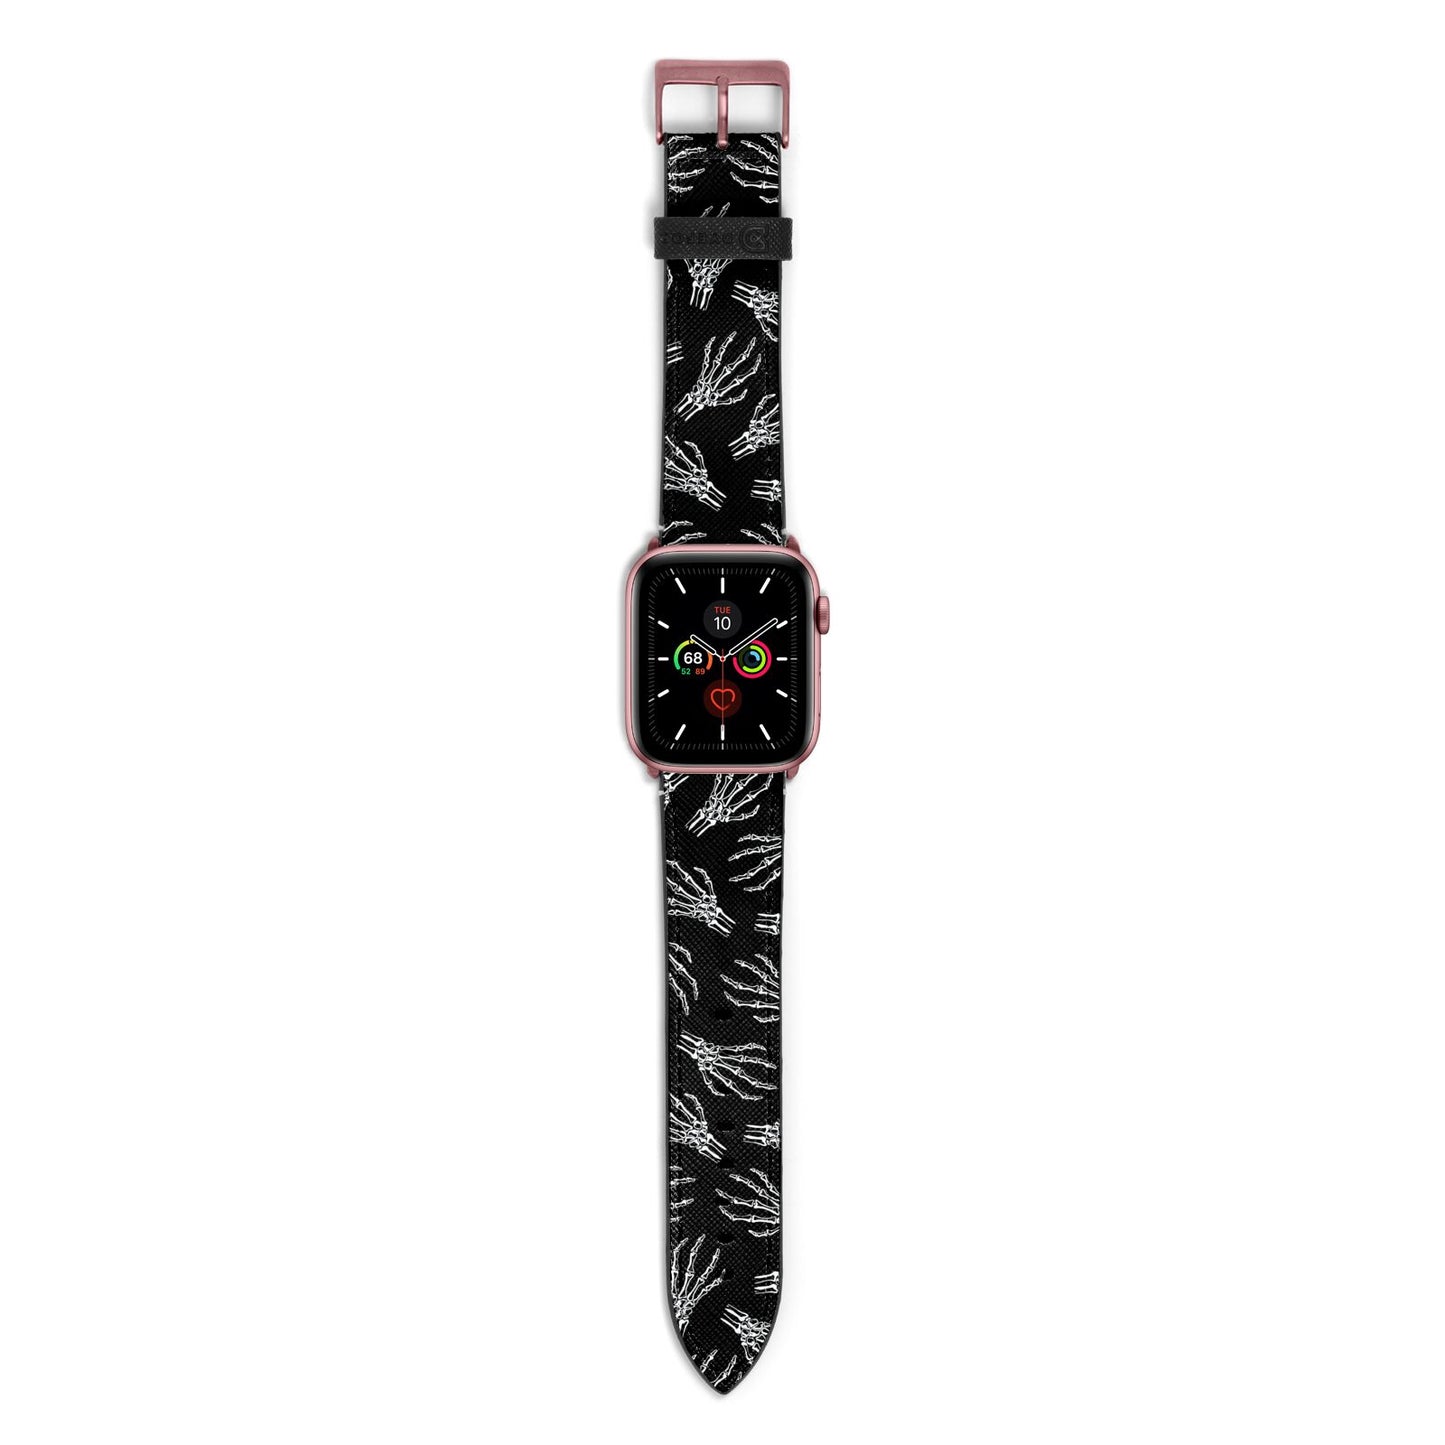 Skeleton Hands Apple Watch Strap with Rose Gold Hardware